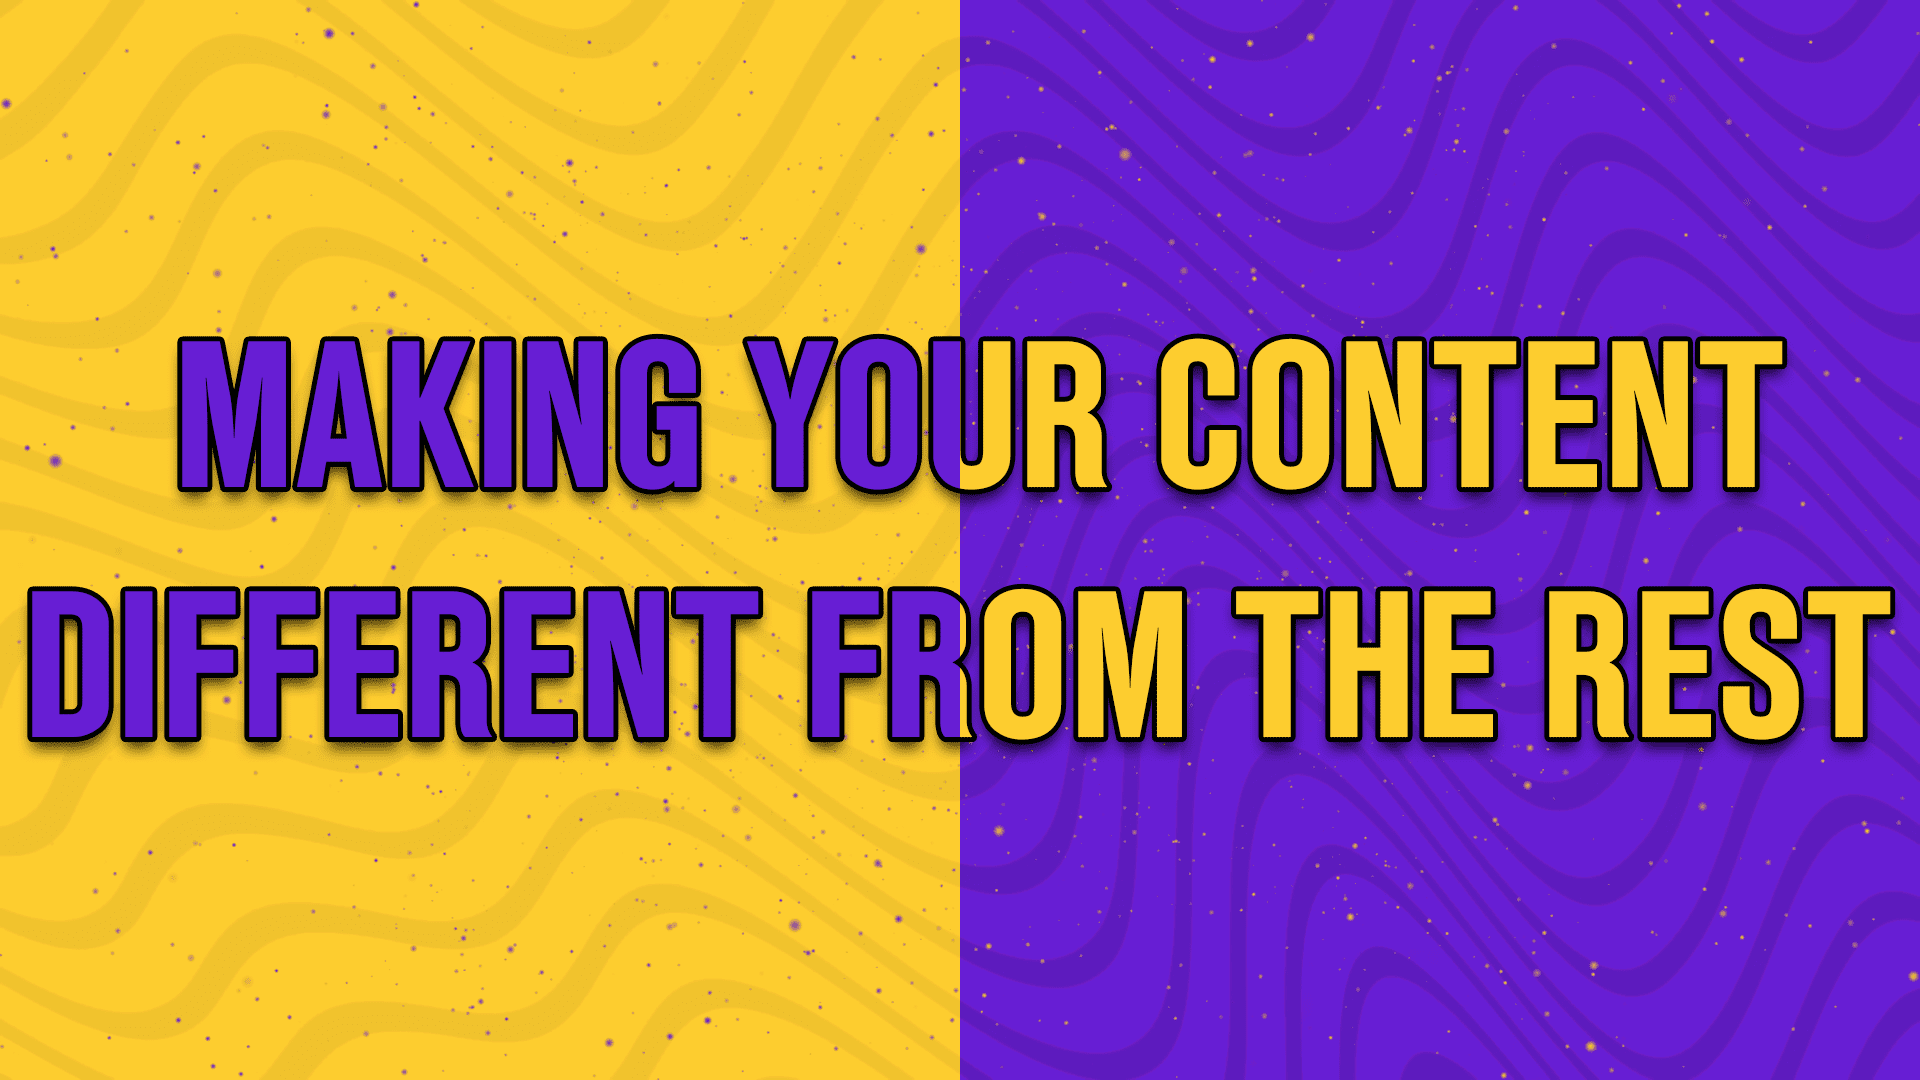 Making your content different from the rest - StreamBee